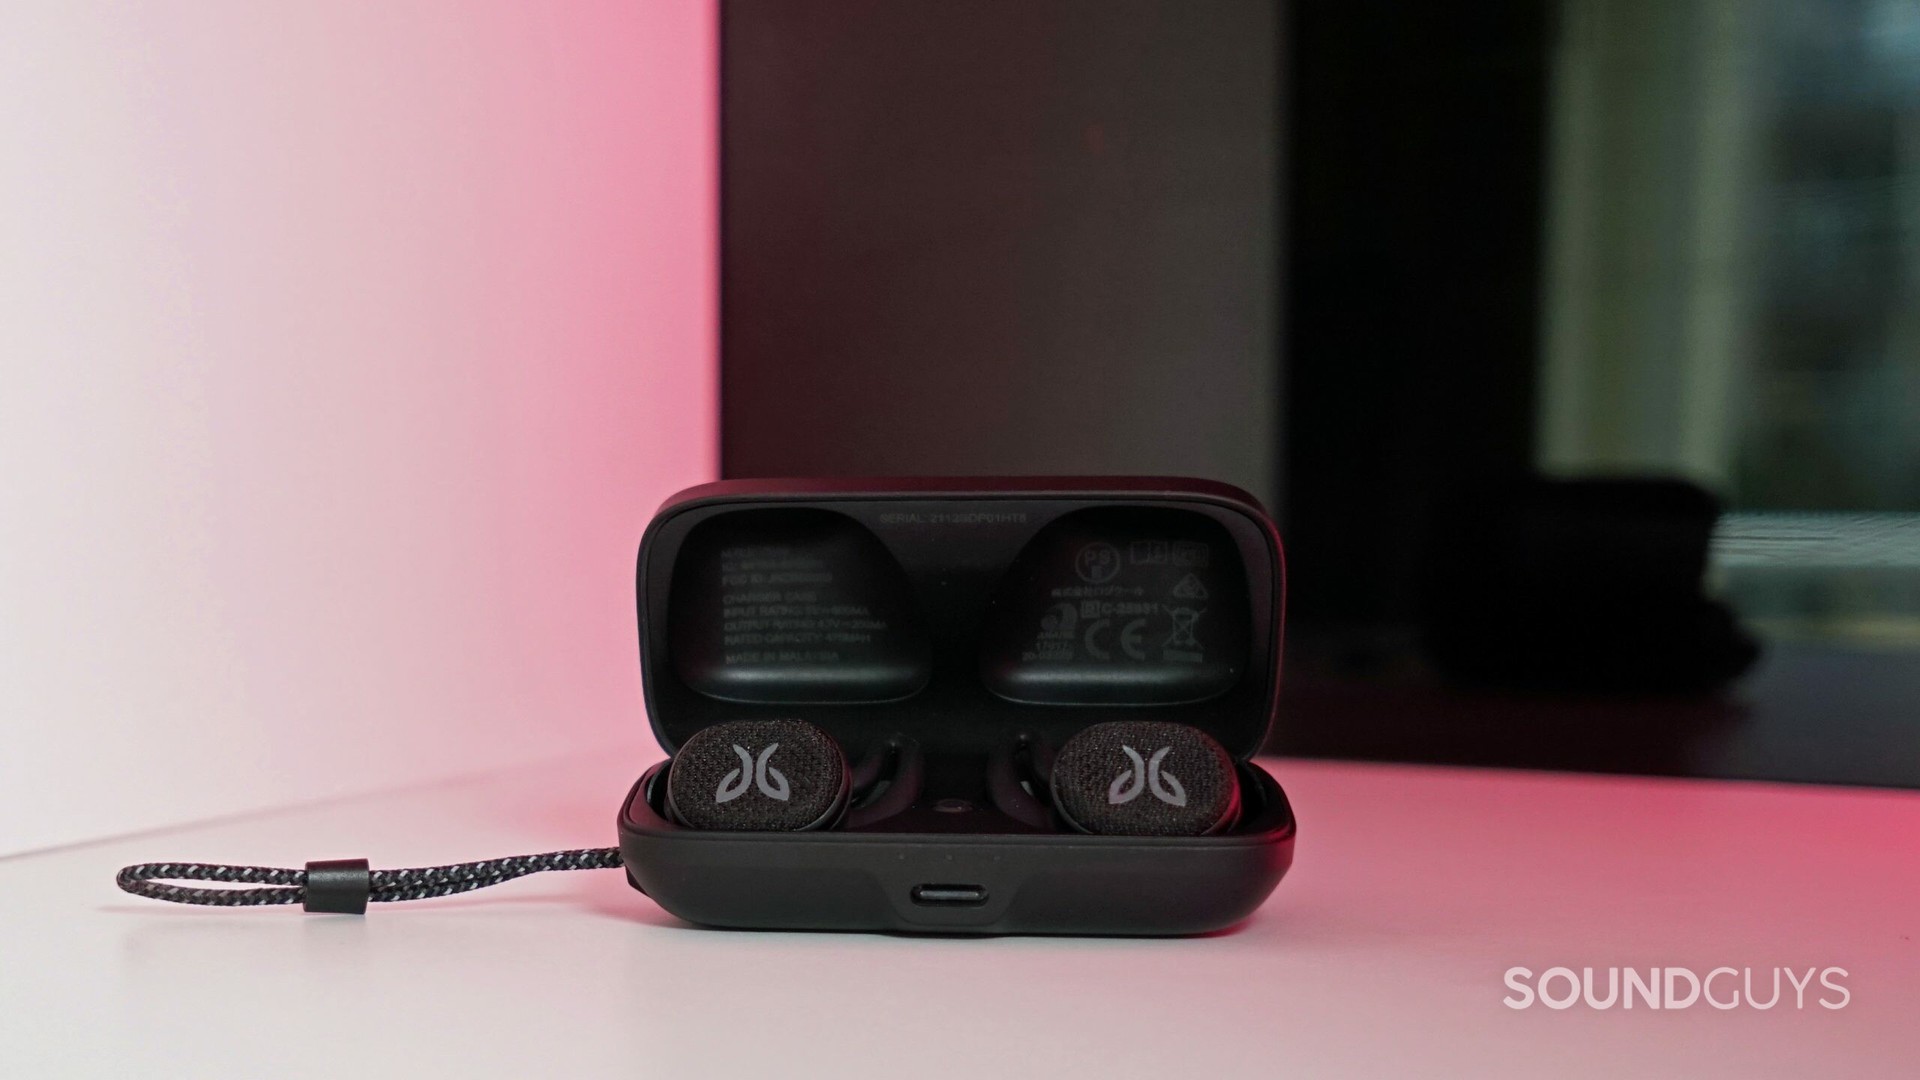 The Jaybird Vista 2 existent   wireless workout earbuds successful  the unfastened  charging case.